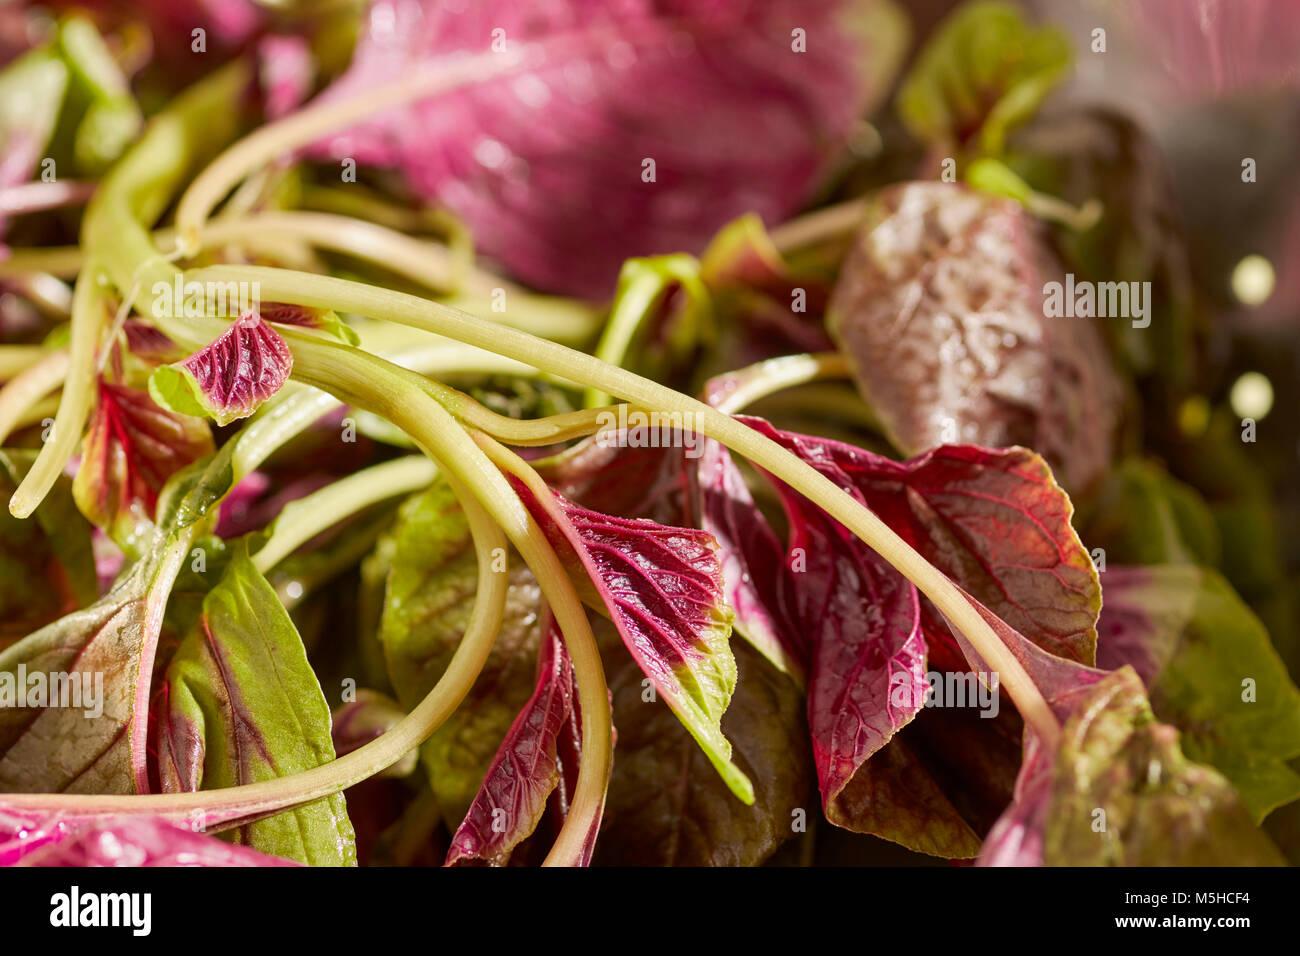 Red Amaranth, a type of spinach popular in Asian cuisines Stock Photo